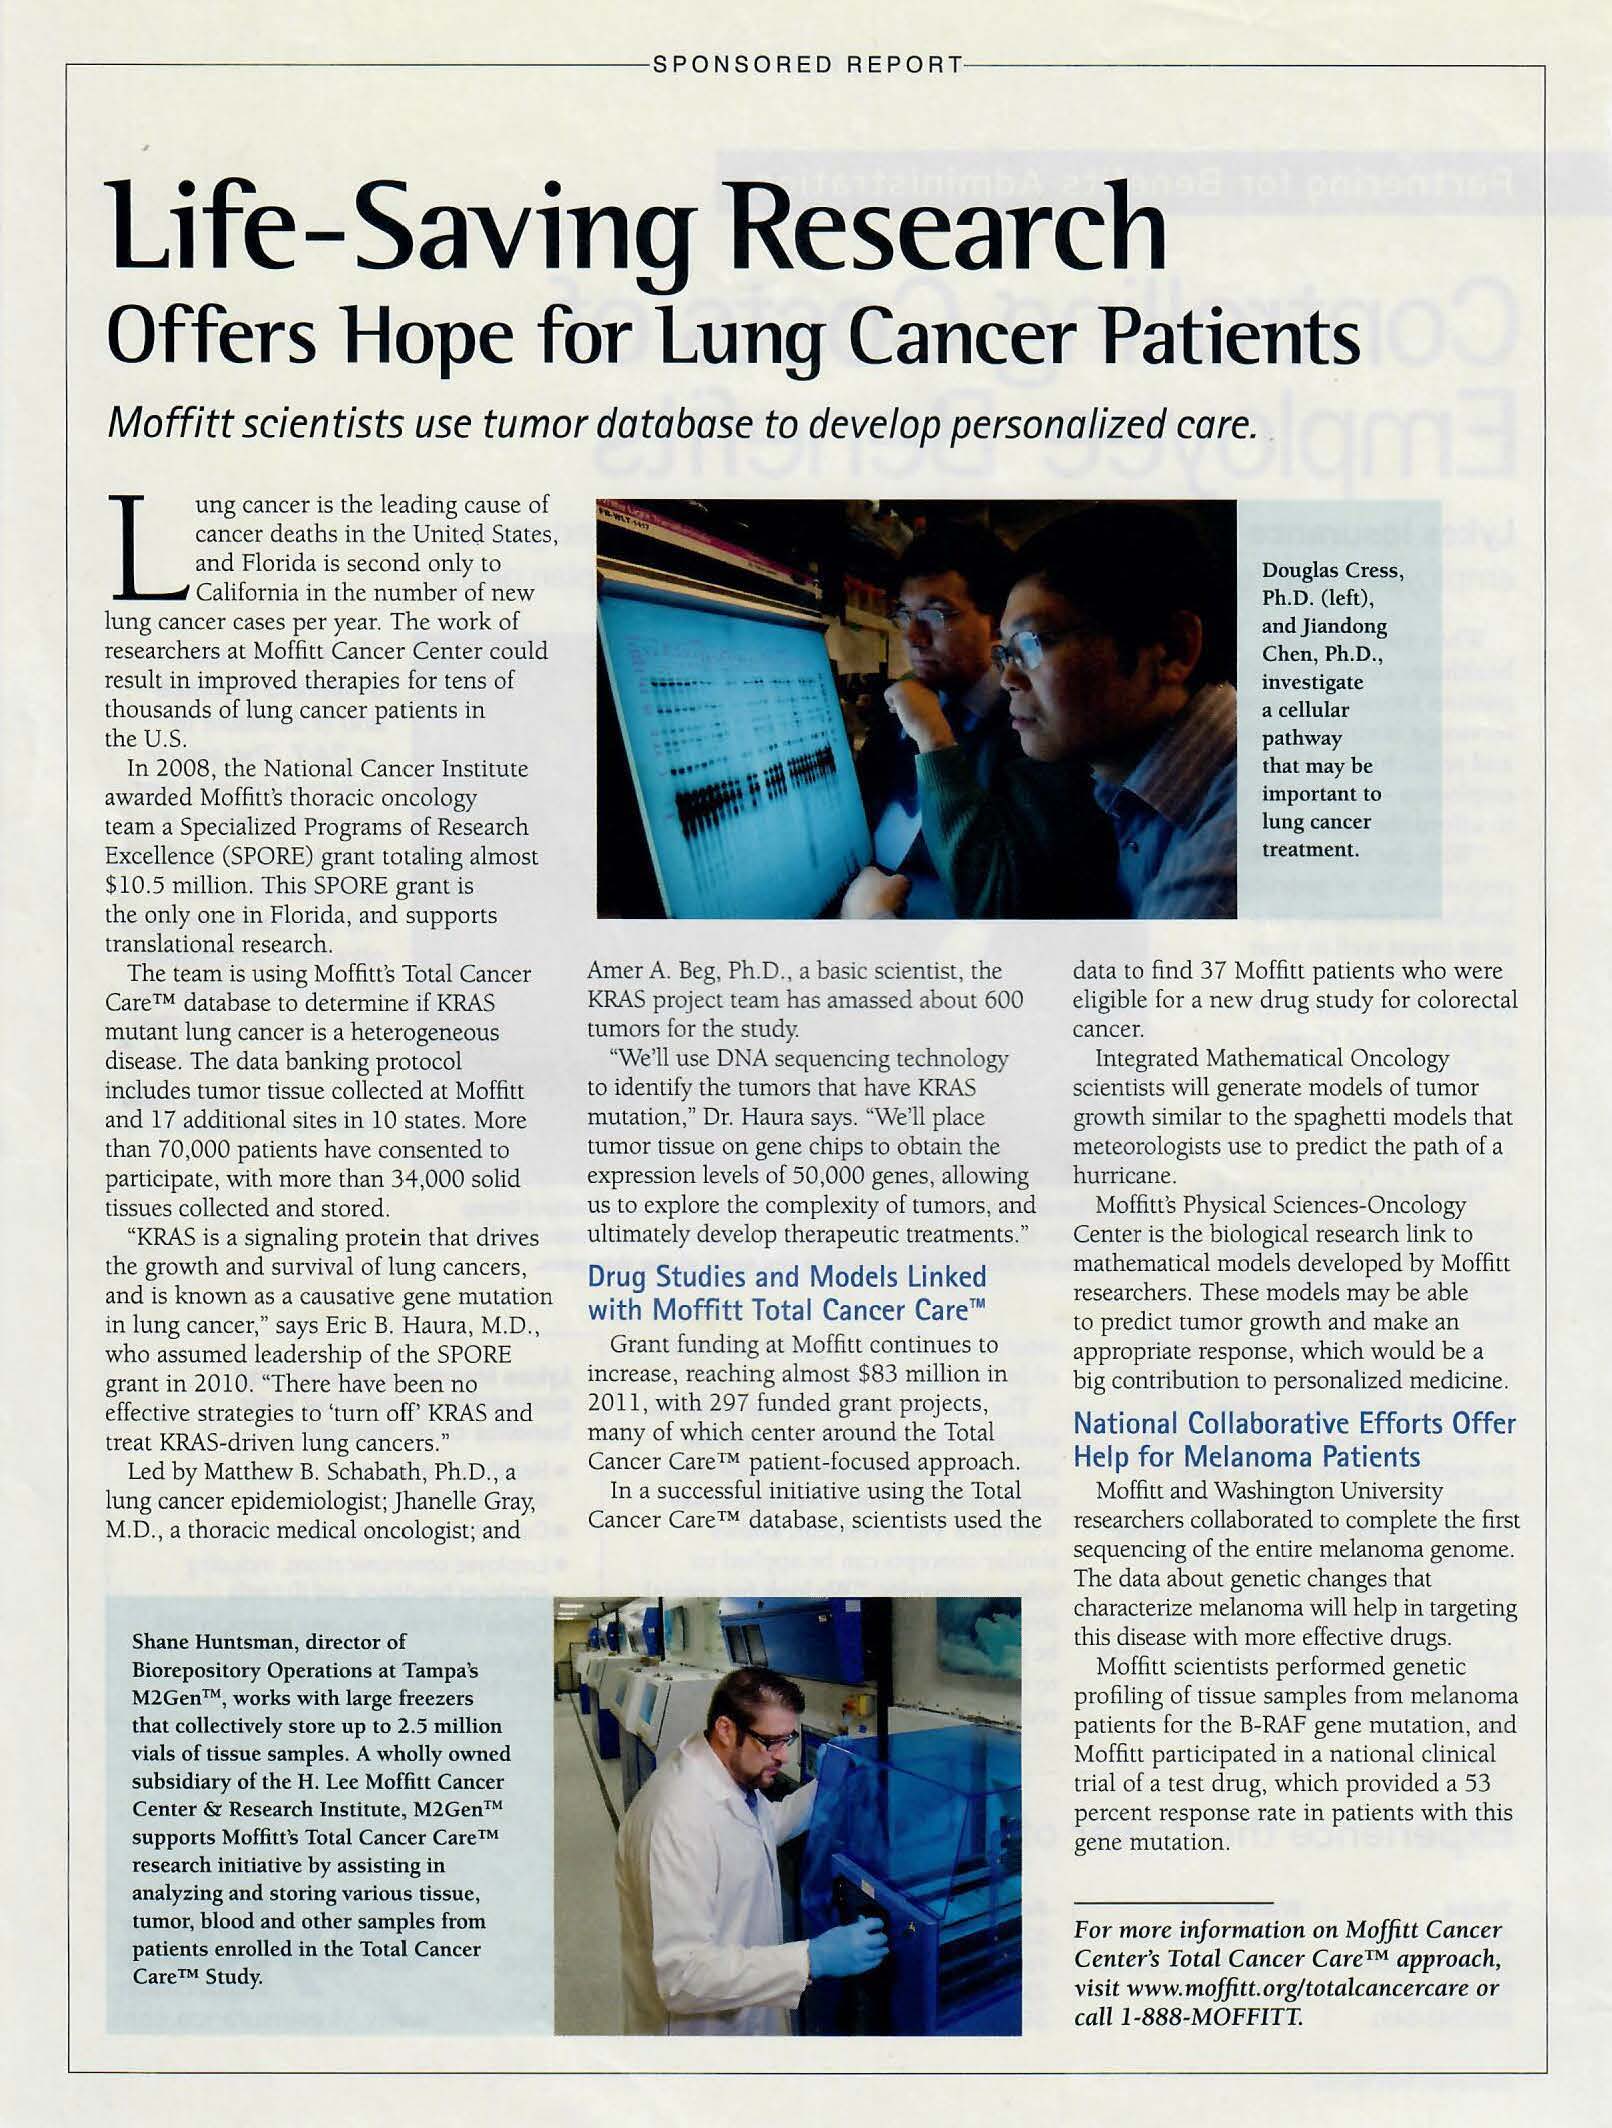 Florida Trend Magazine: Life-Saving Research Offers Hope for Lung Cancer Patients